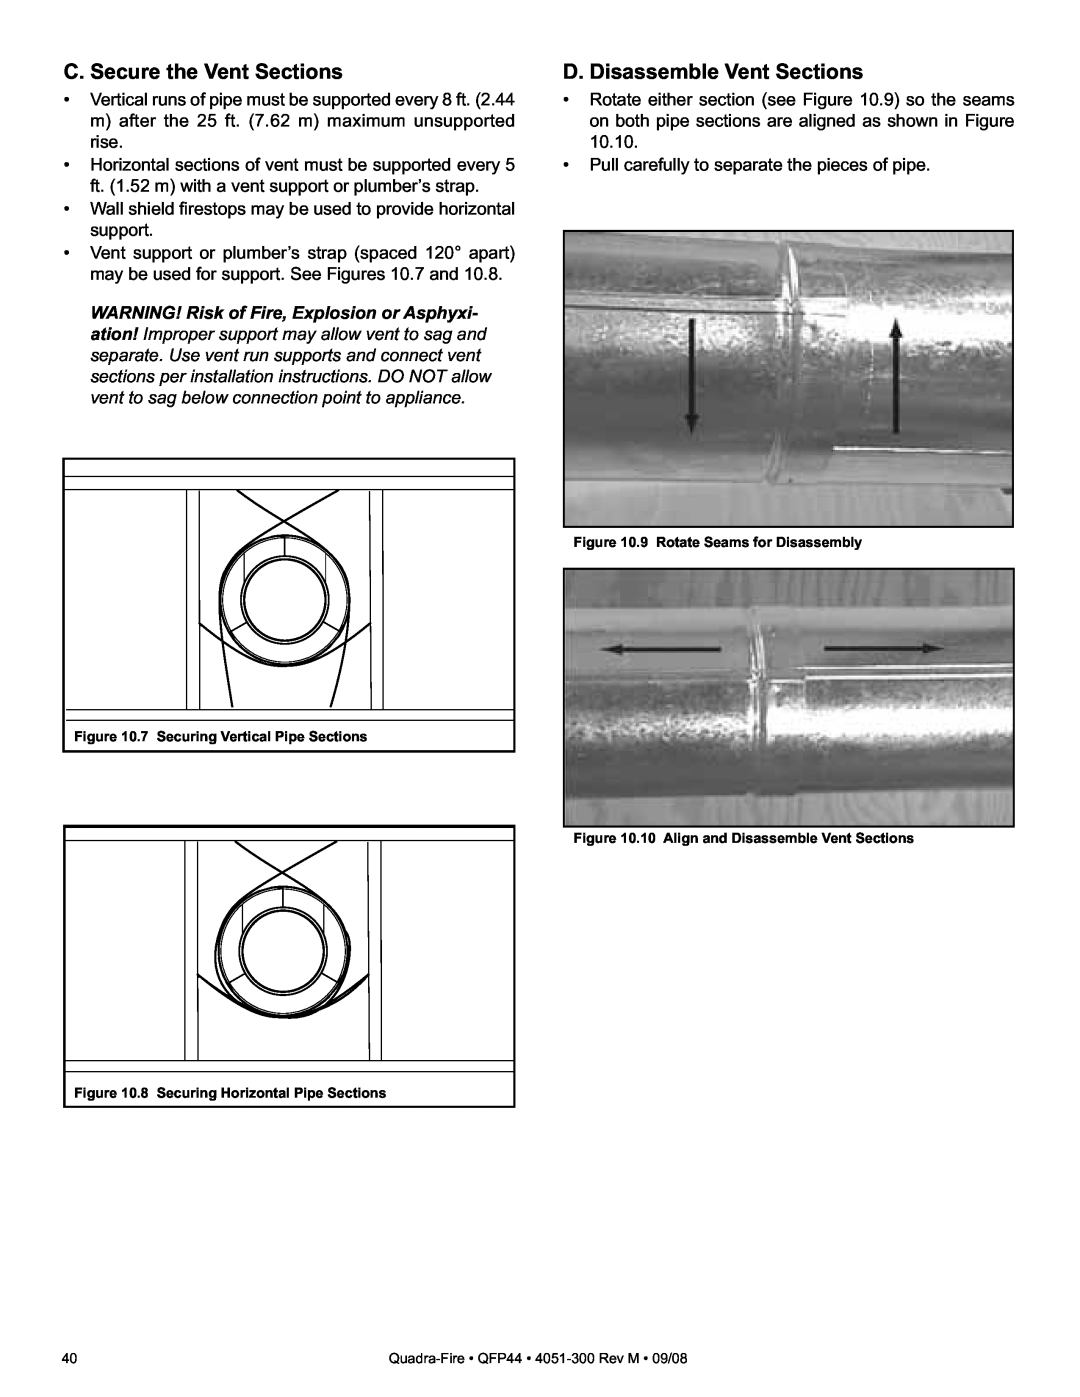 Quadra-Fire QFP44 owner manual C. Secure the Vent Sections, D. Disassemble Vent Sections 